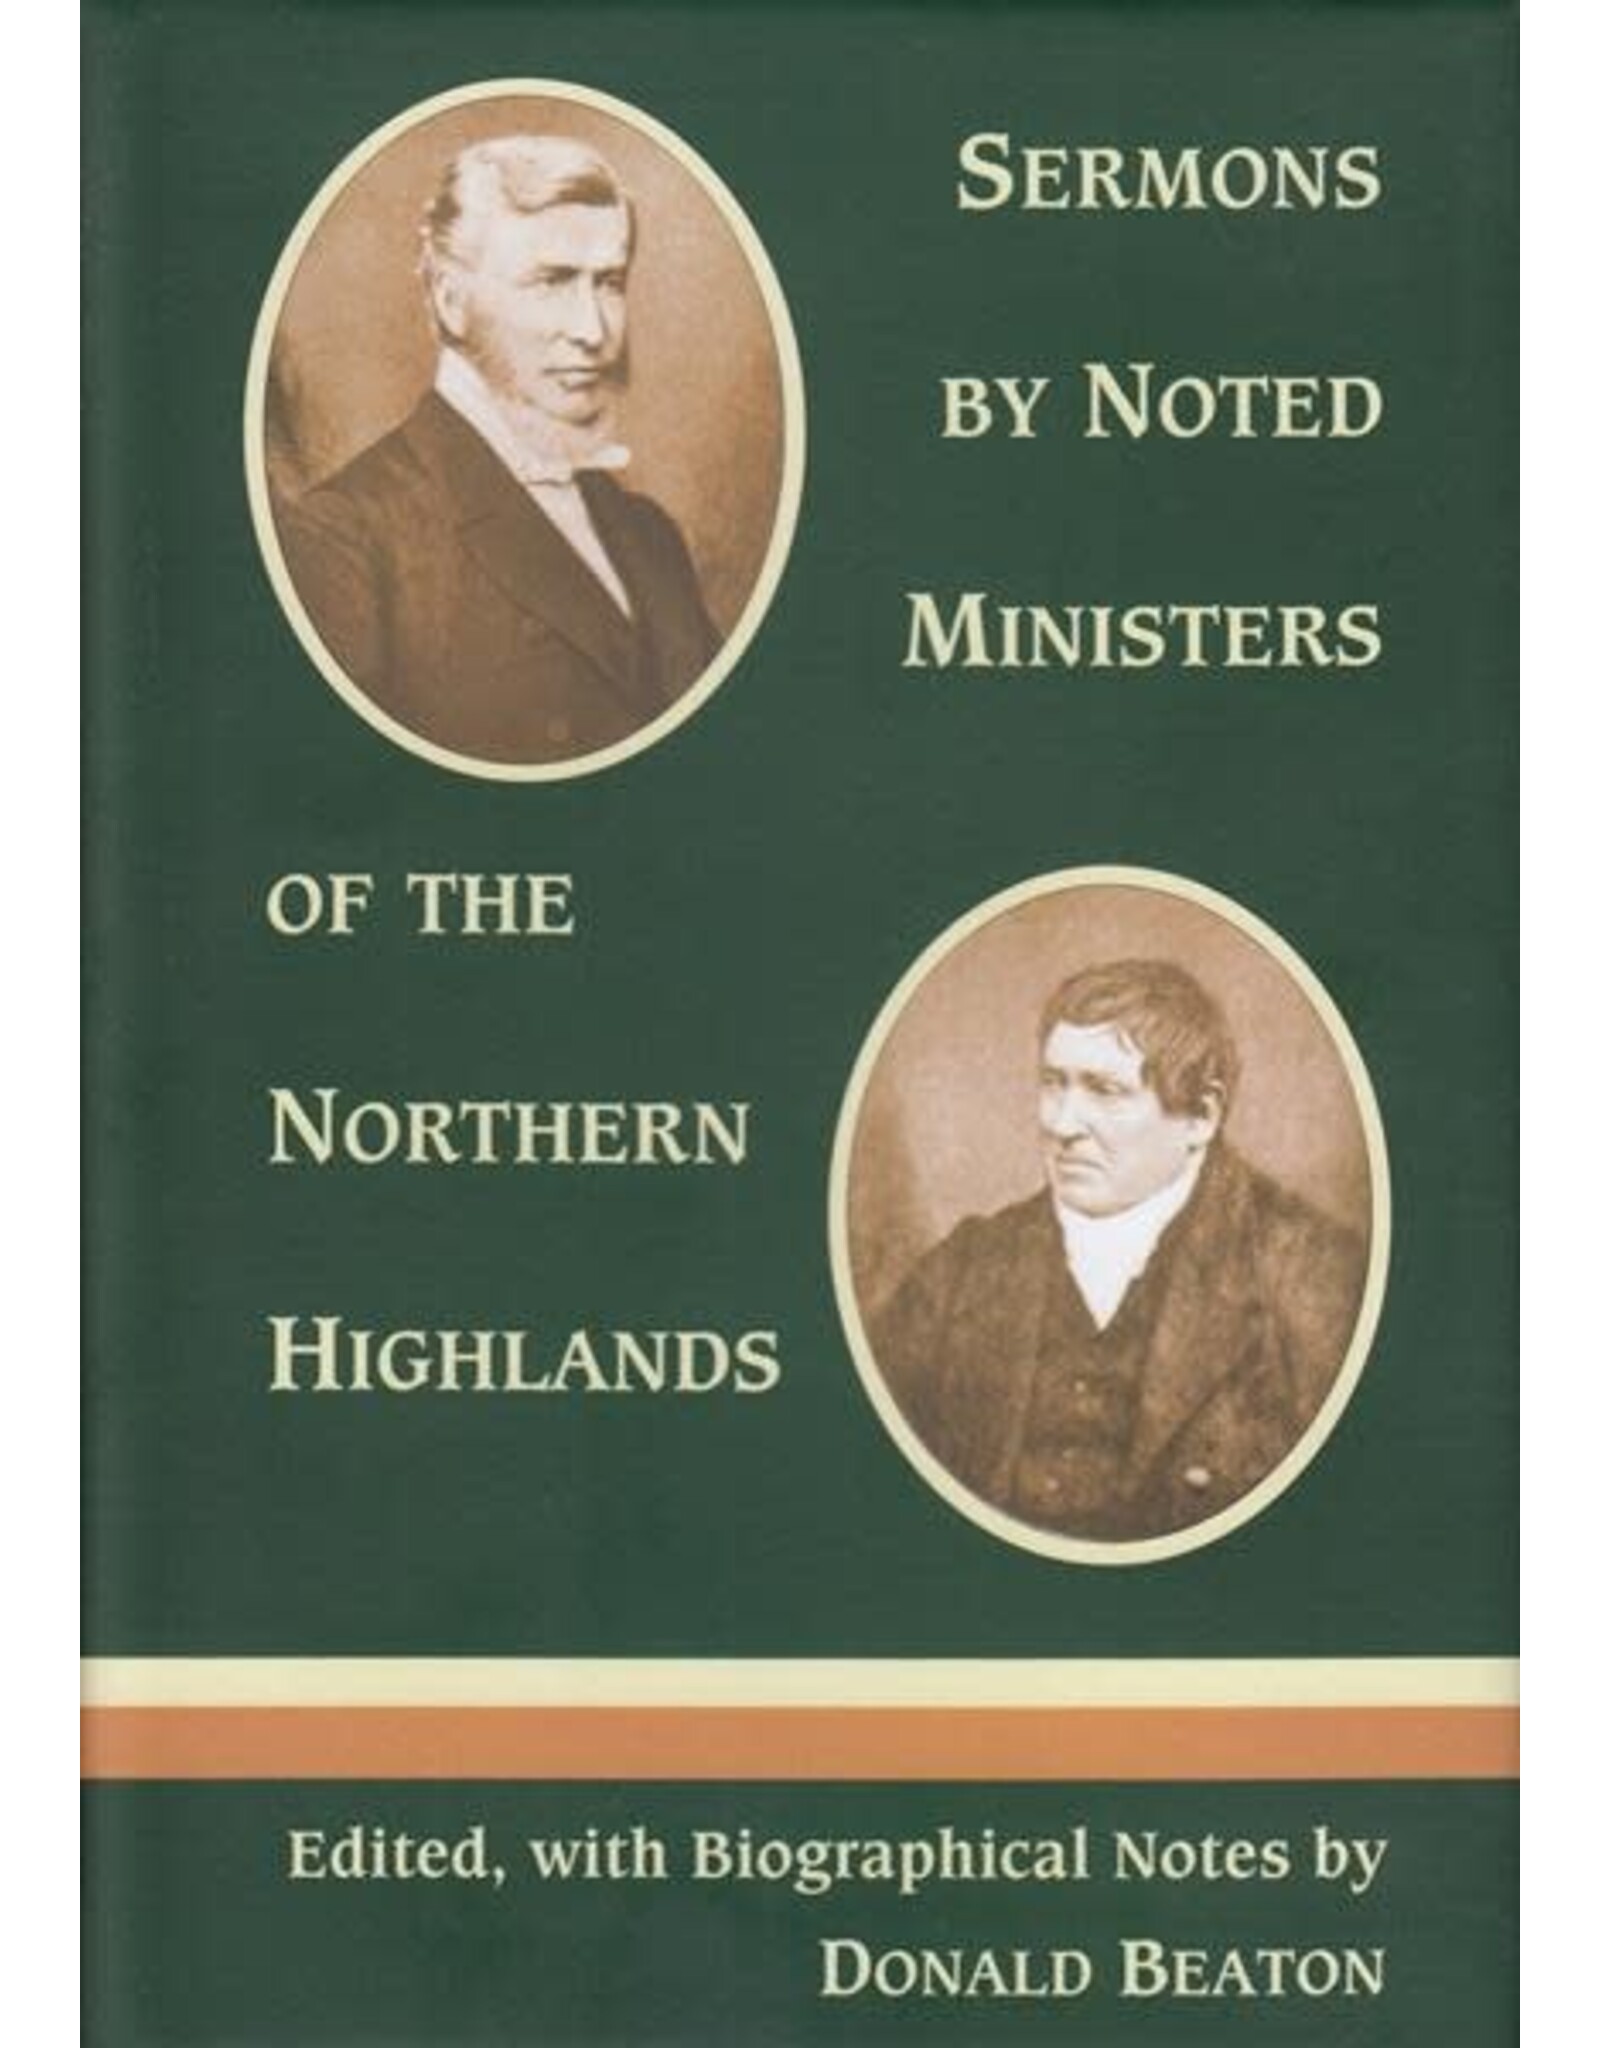 Donald Beaton Sermons by Noted Ministers of the Northern Highlands